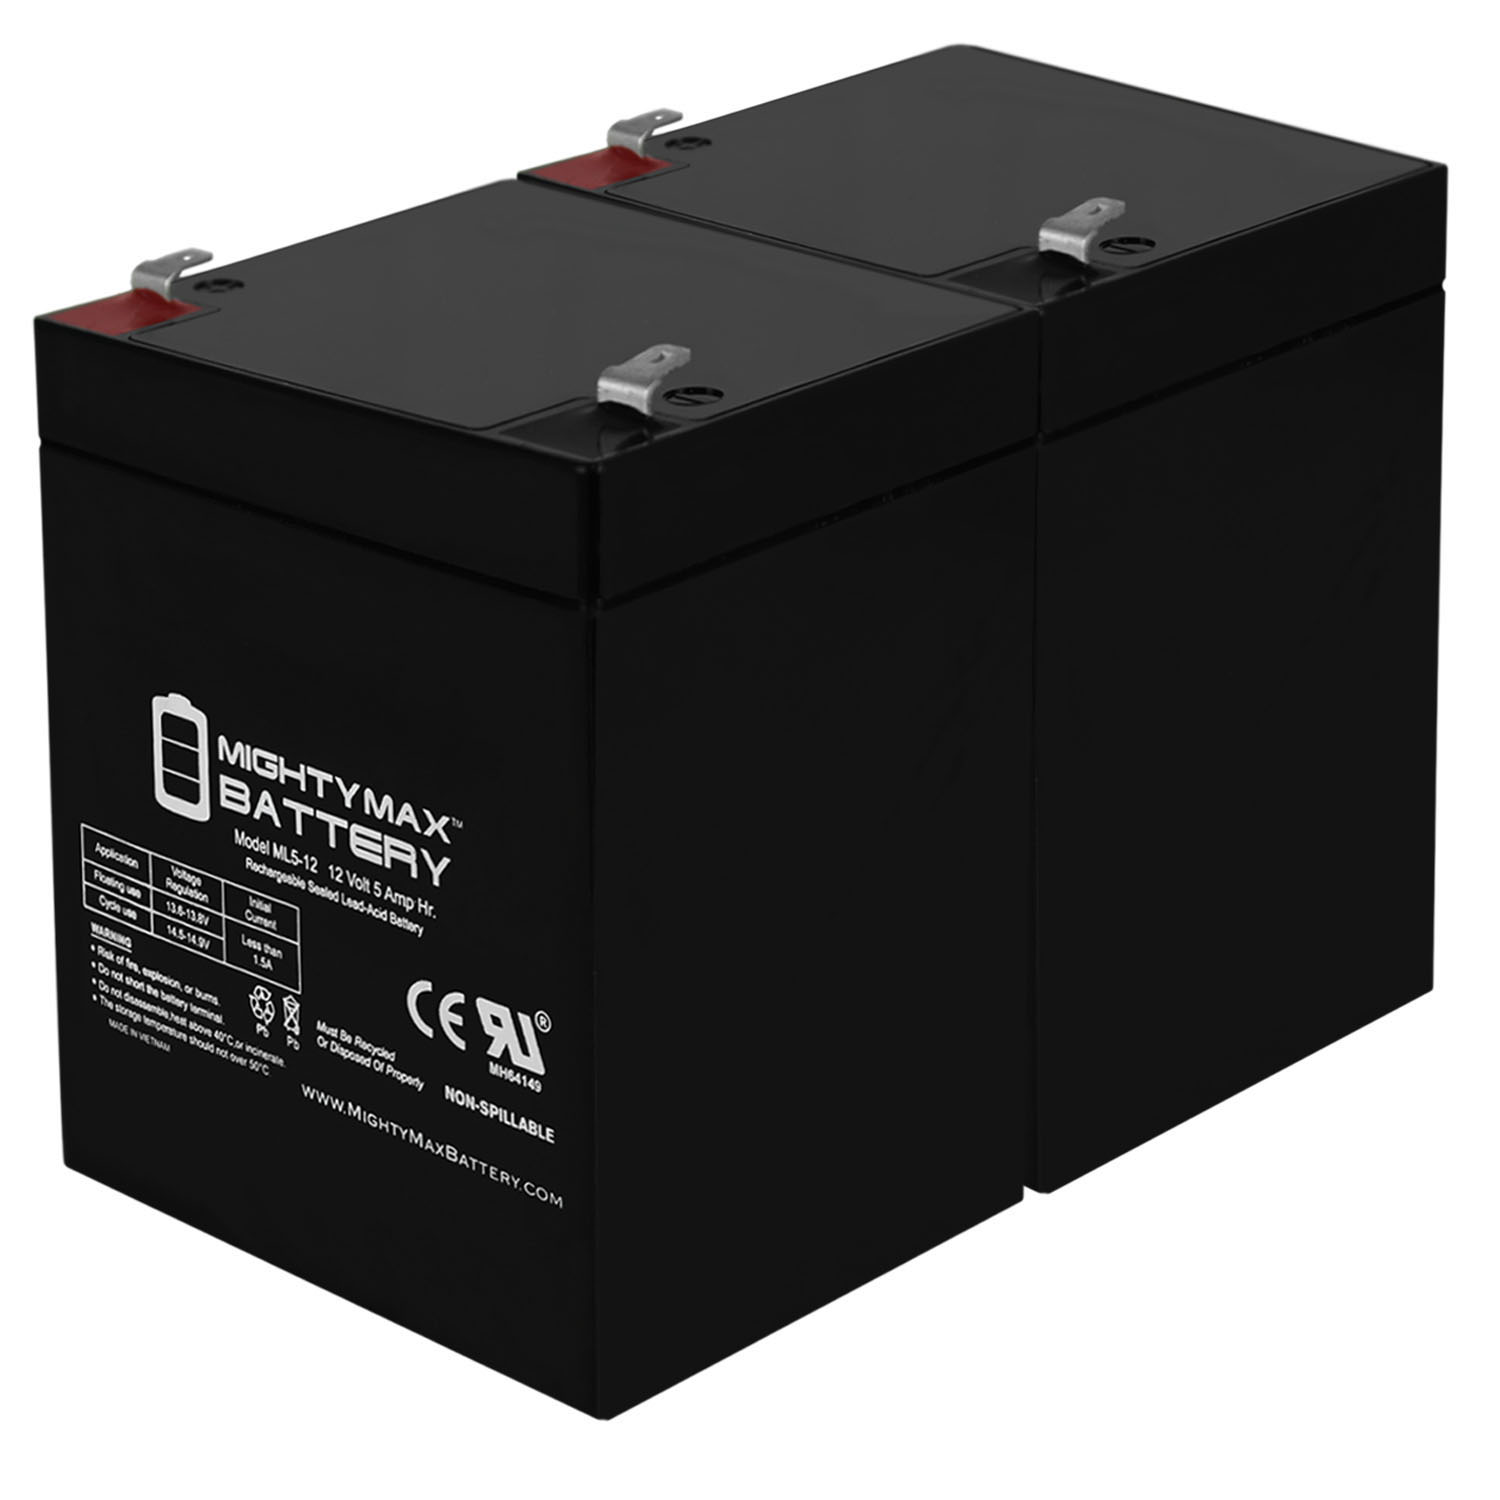 12V 5AH SLA Replacement Battery for Unipower WP5612 - 2 Pack